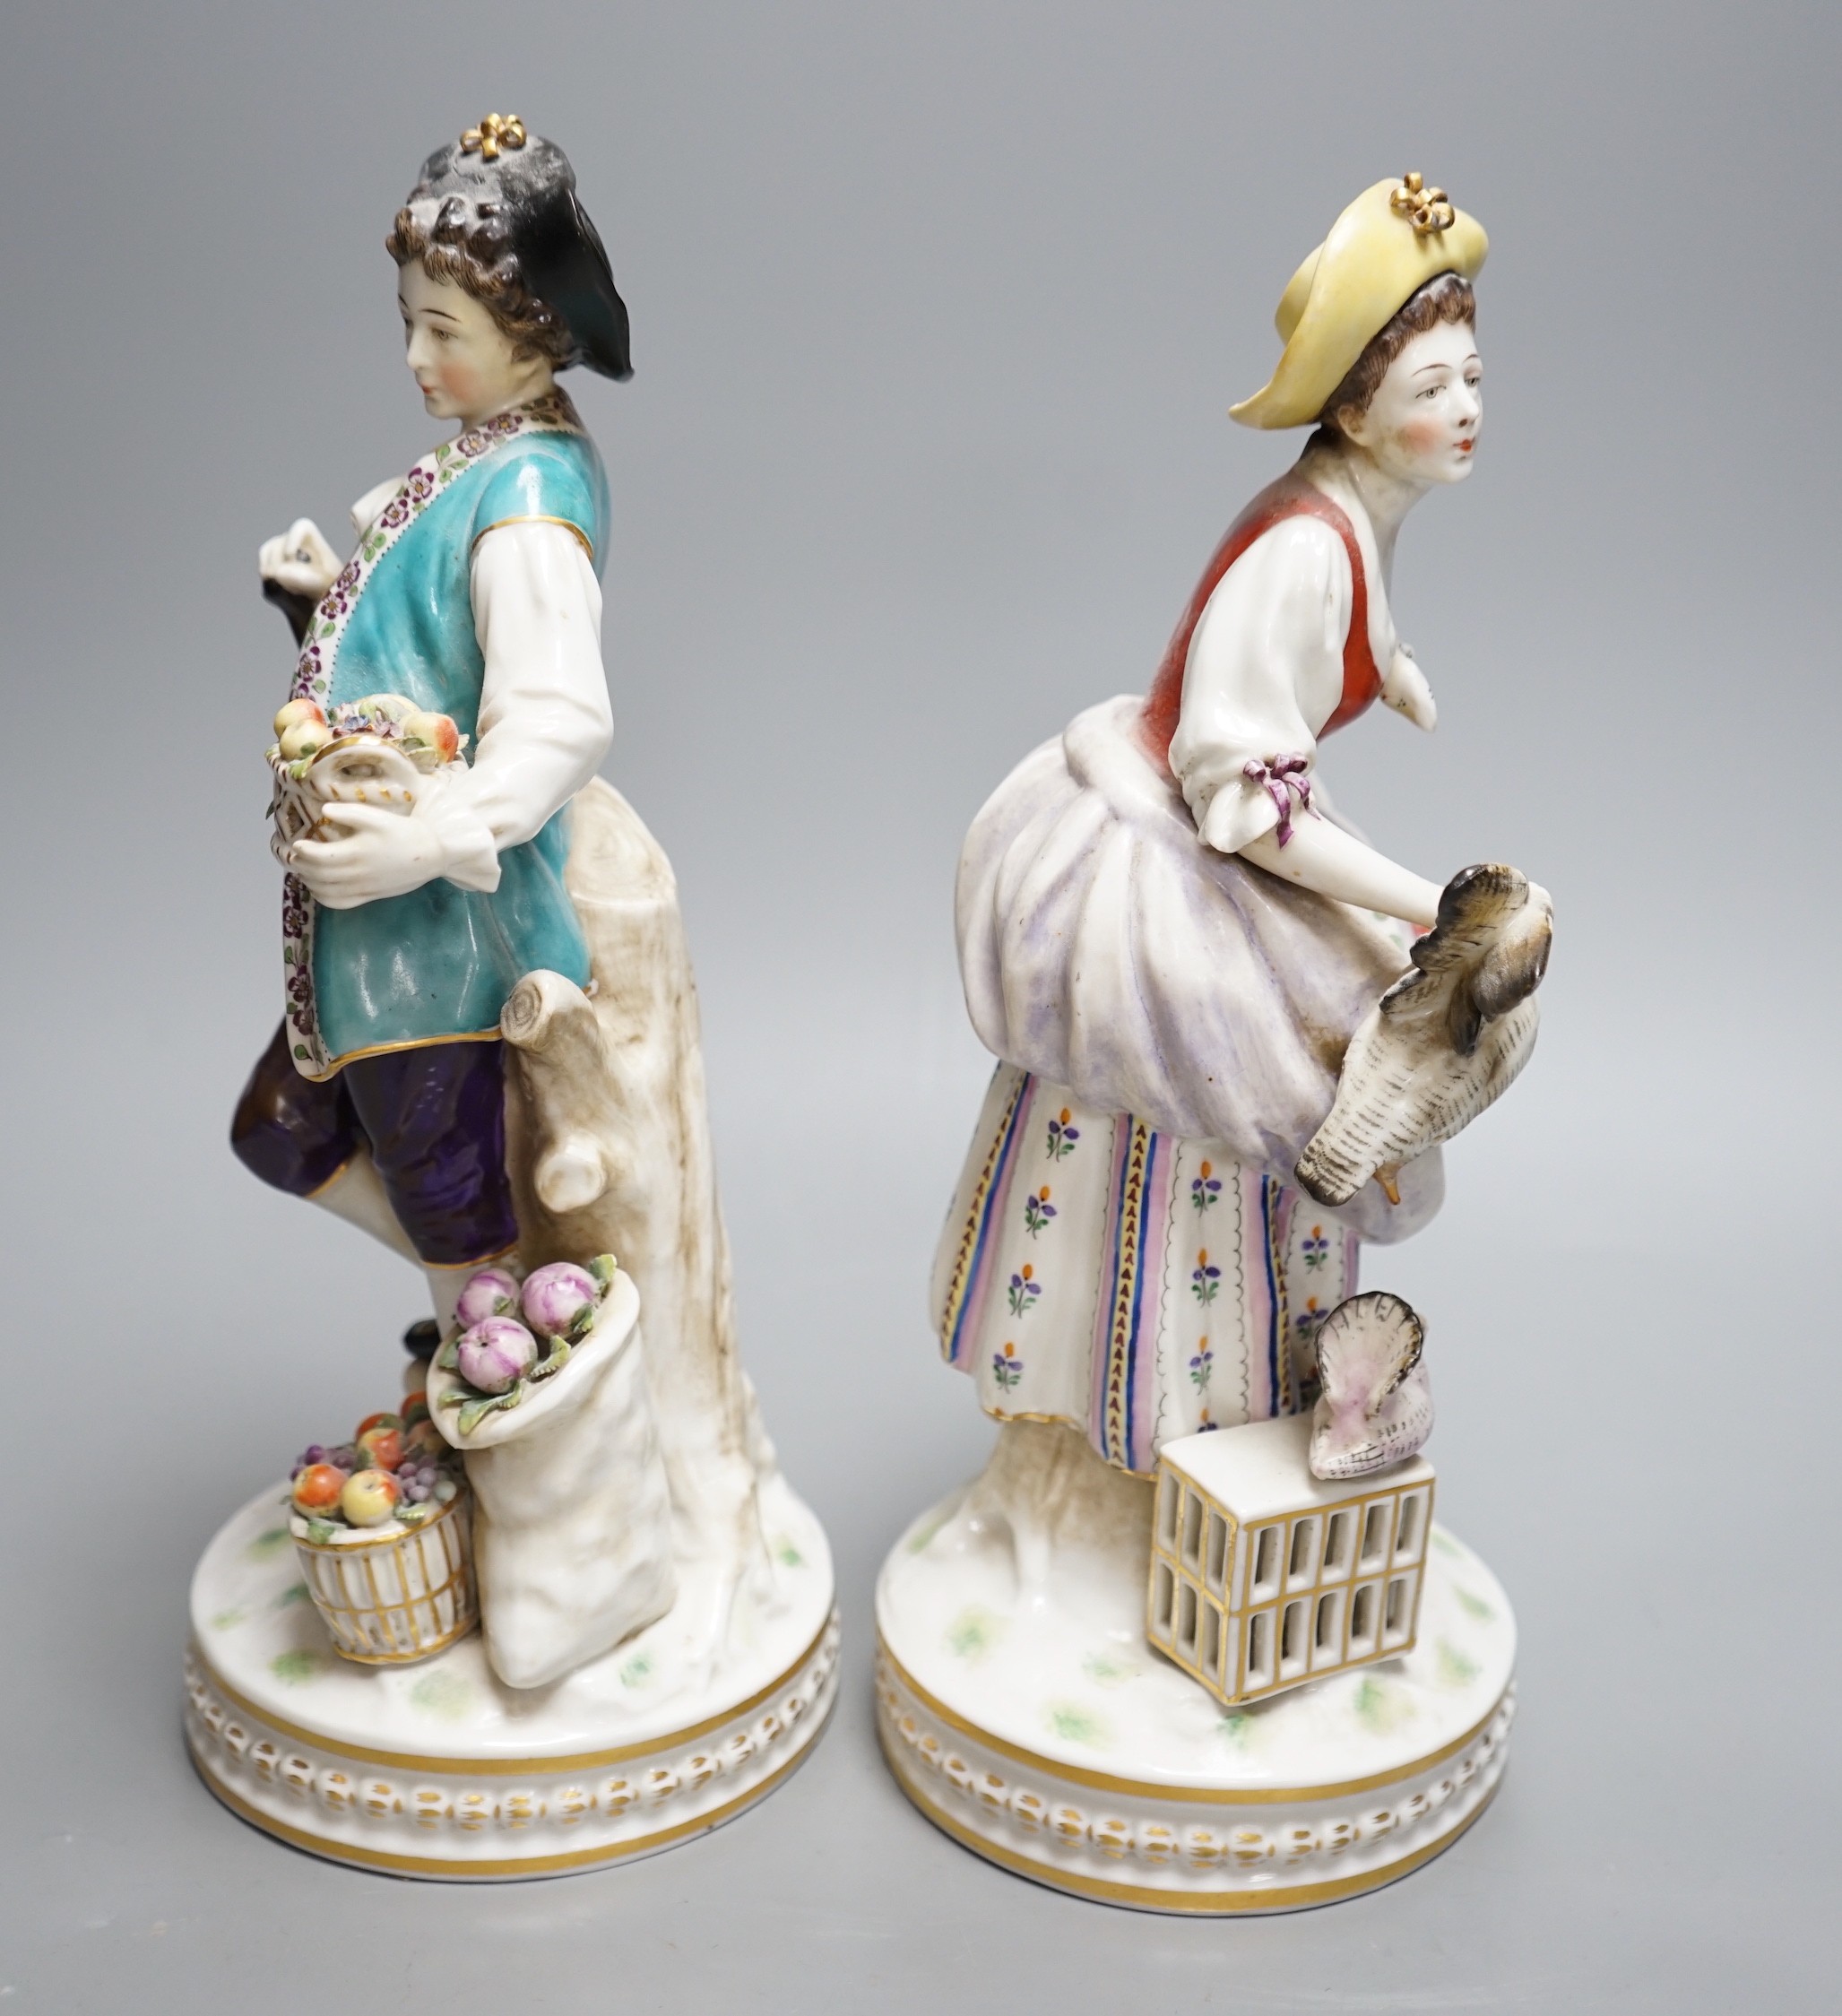 A pair of early 20th century Italian porcelain figures, 29.5cm